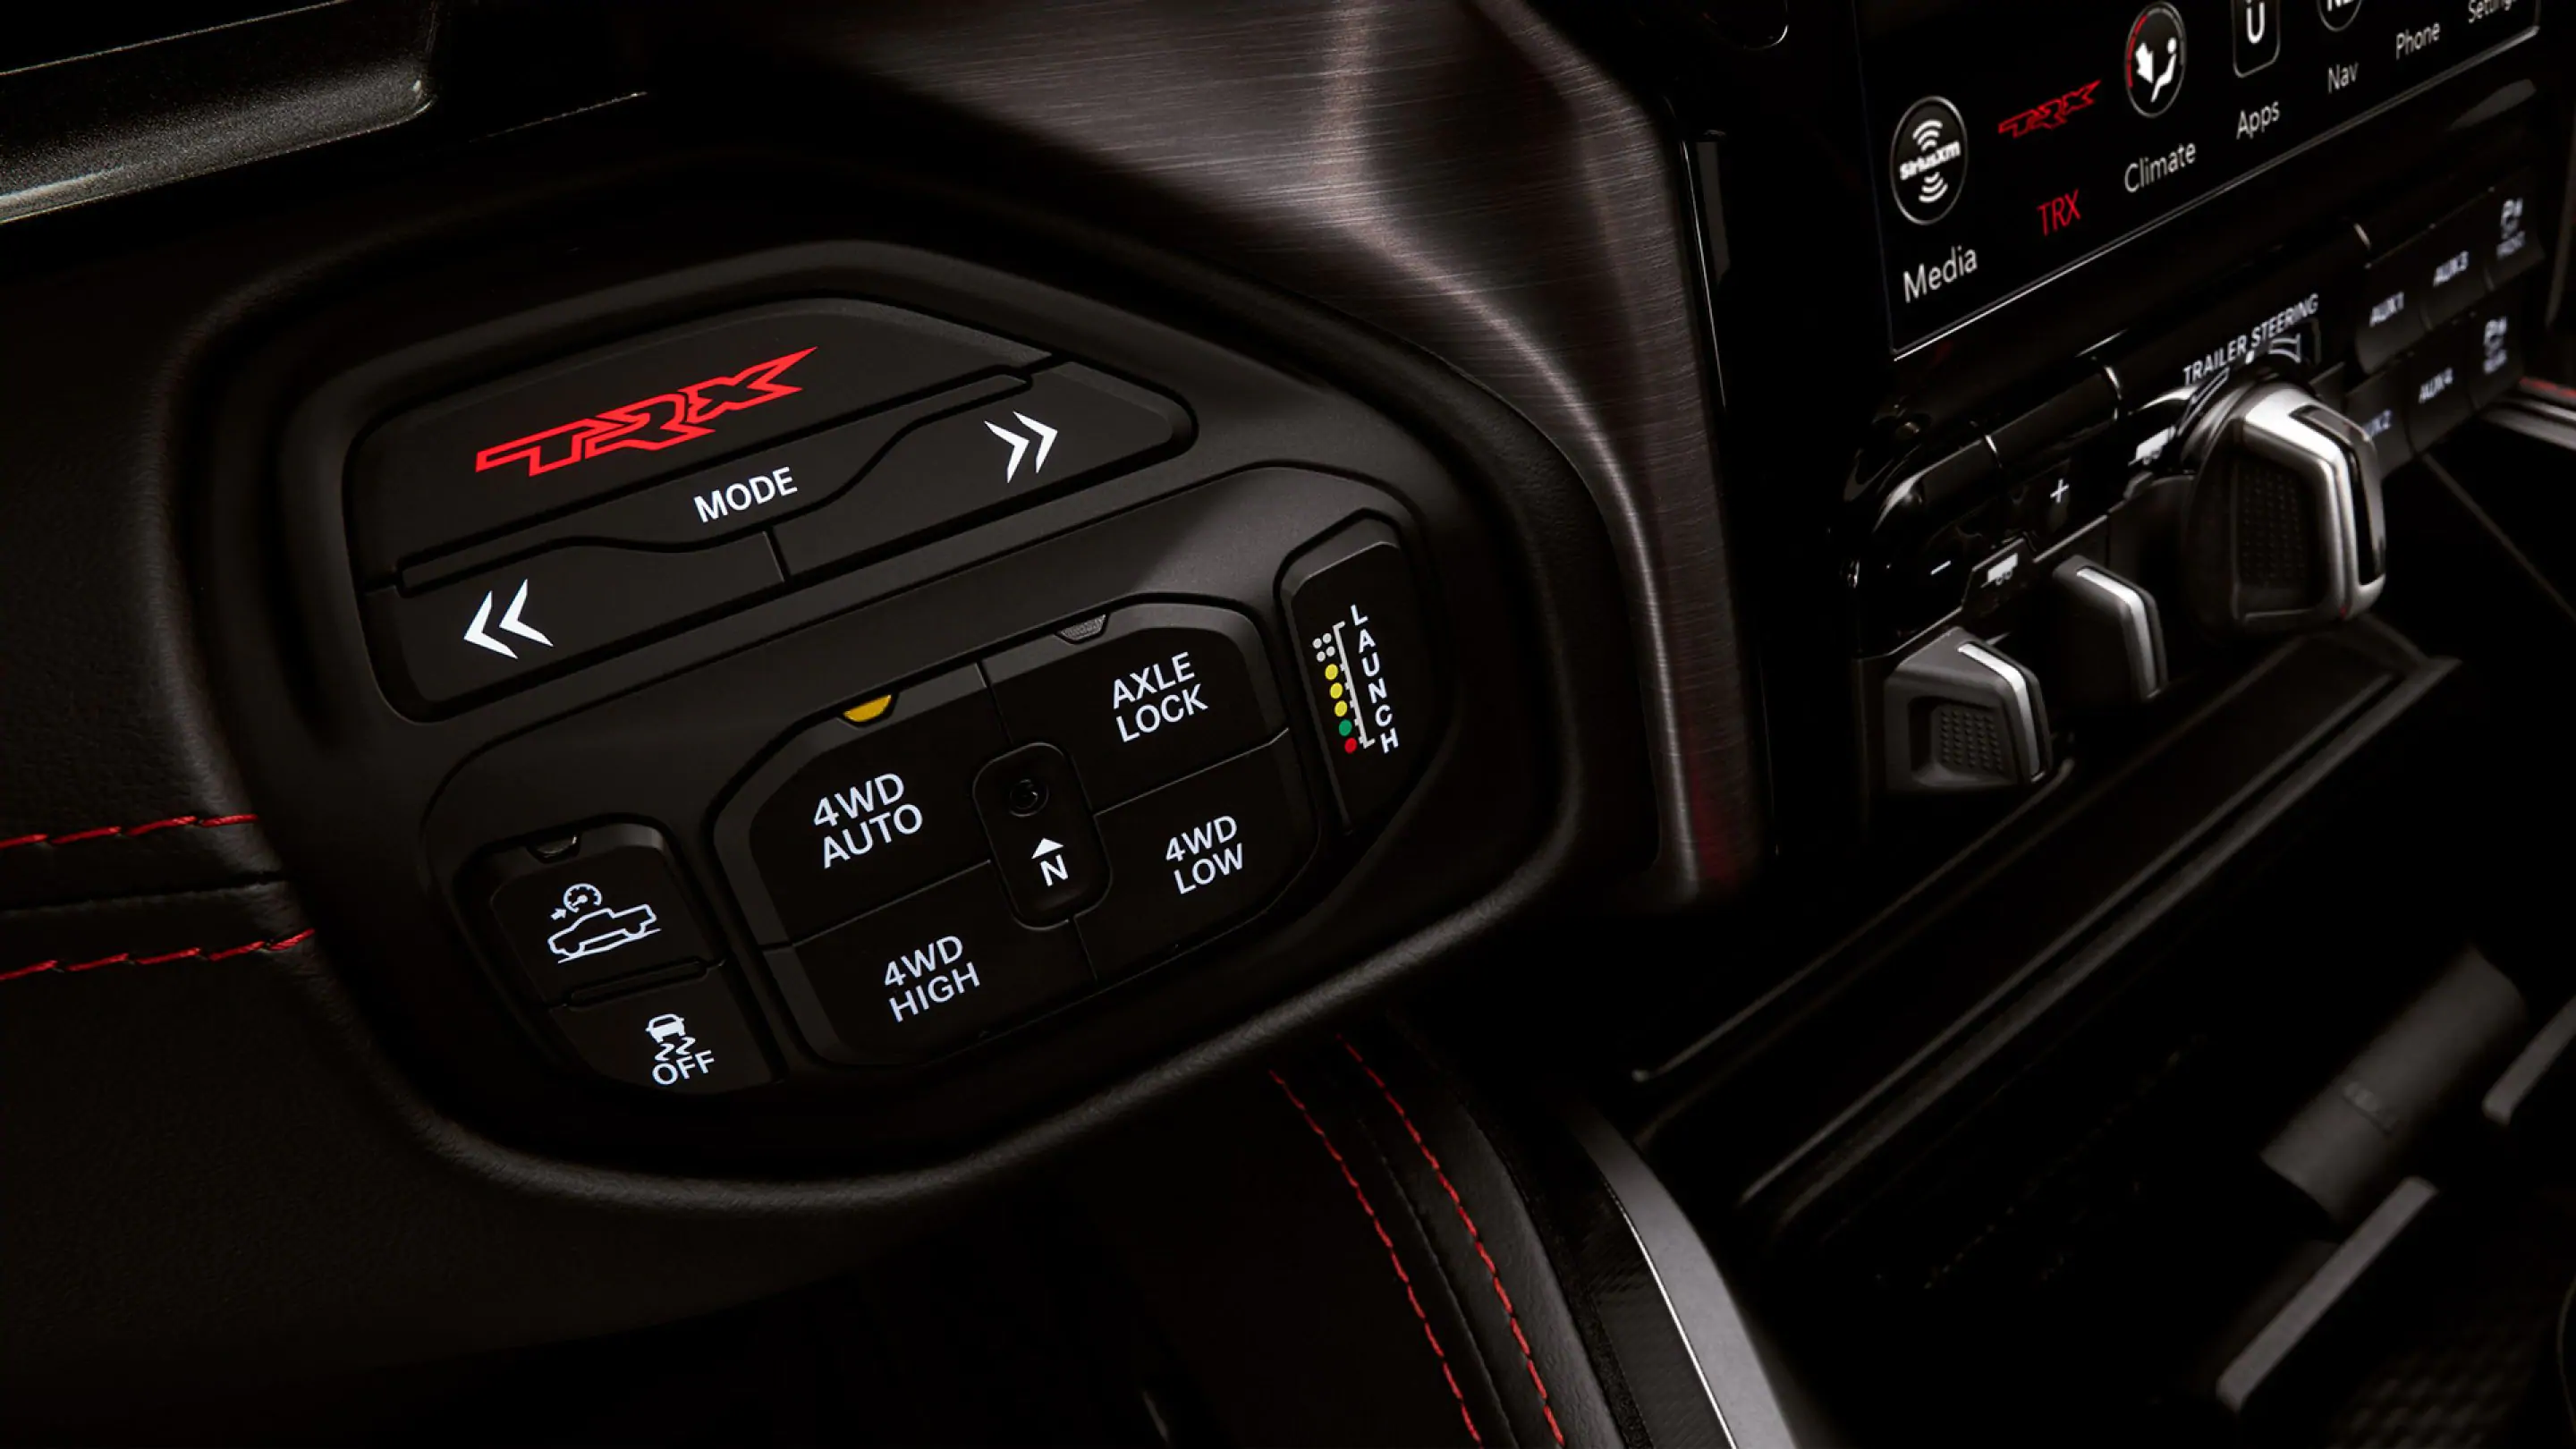 With the shifter repositioned to the center console, the Performance Control T-case switch bank now offers a host of commands from drive mode selector to Traction Control all at the driver’s fingertips.